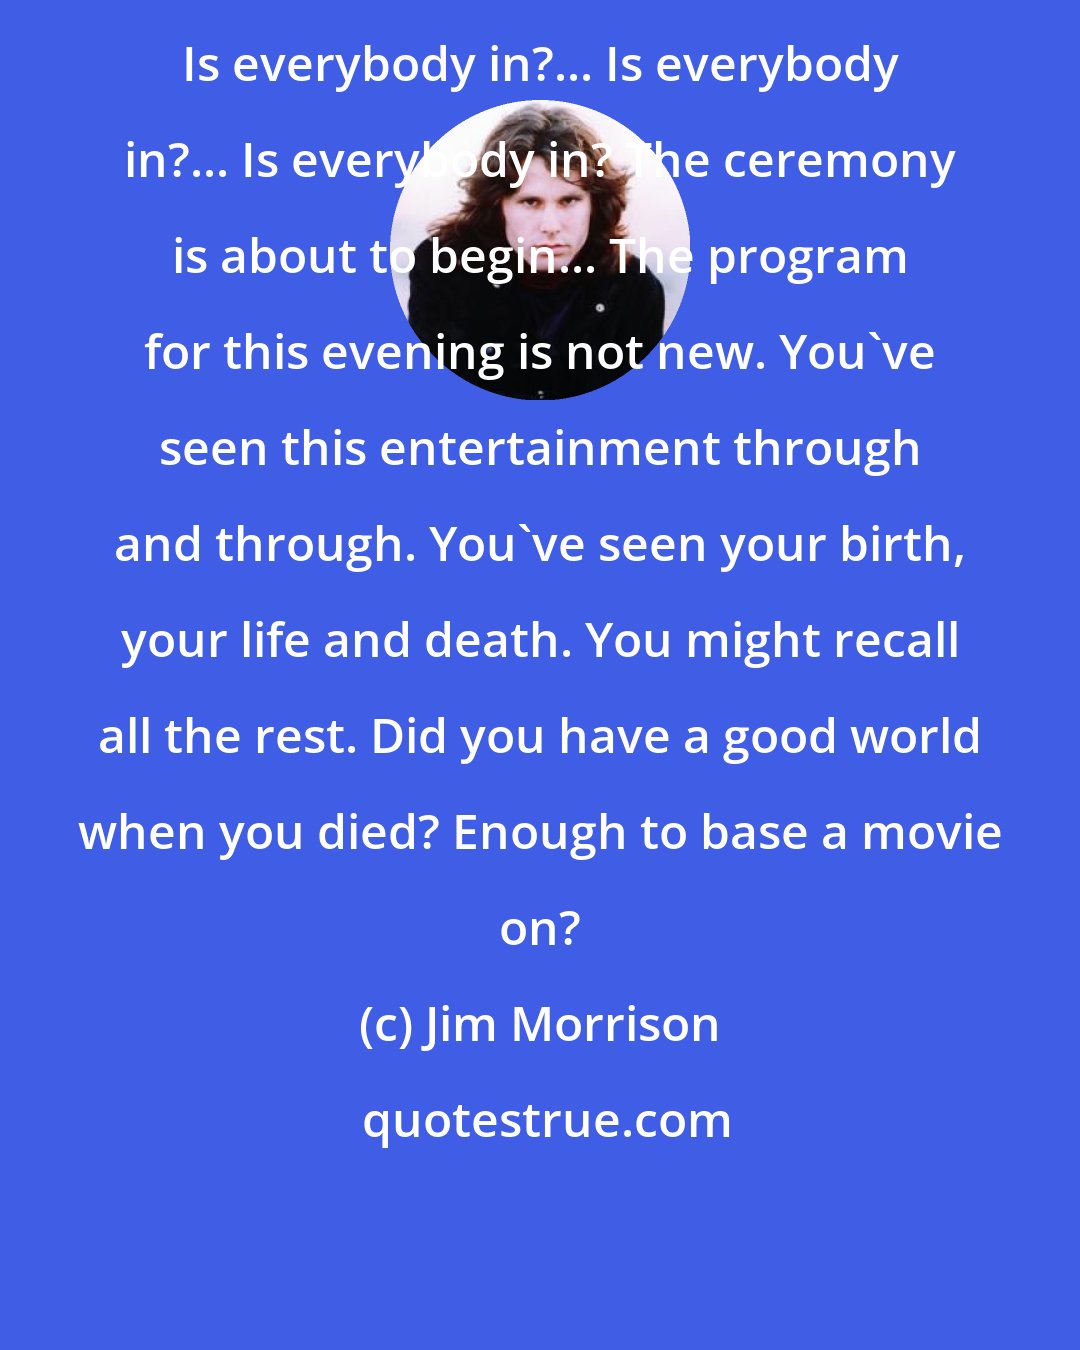 Jim Morrison: Is everybody in?... Is everybody in?... Is everybody in? The ceremony is about to begin... The program for this evening is not new. You've seen this entertainment through and through. You've seen your birth, your life and death. You might recall all the rest. Did you have a good world when you died? Enough to base a movie on?